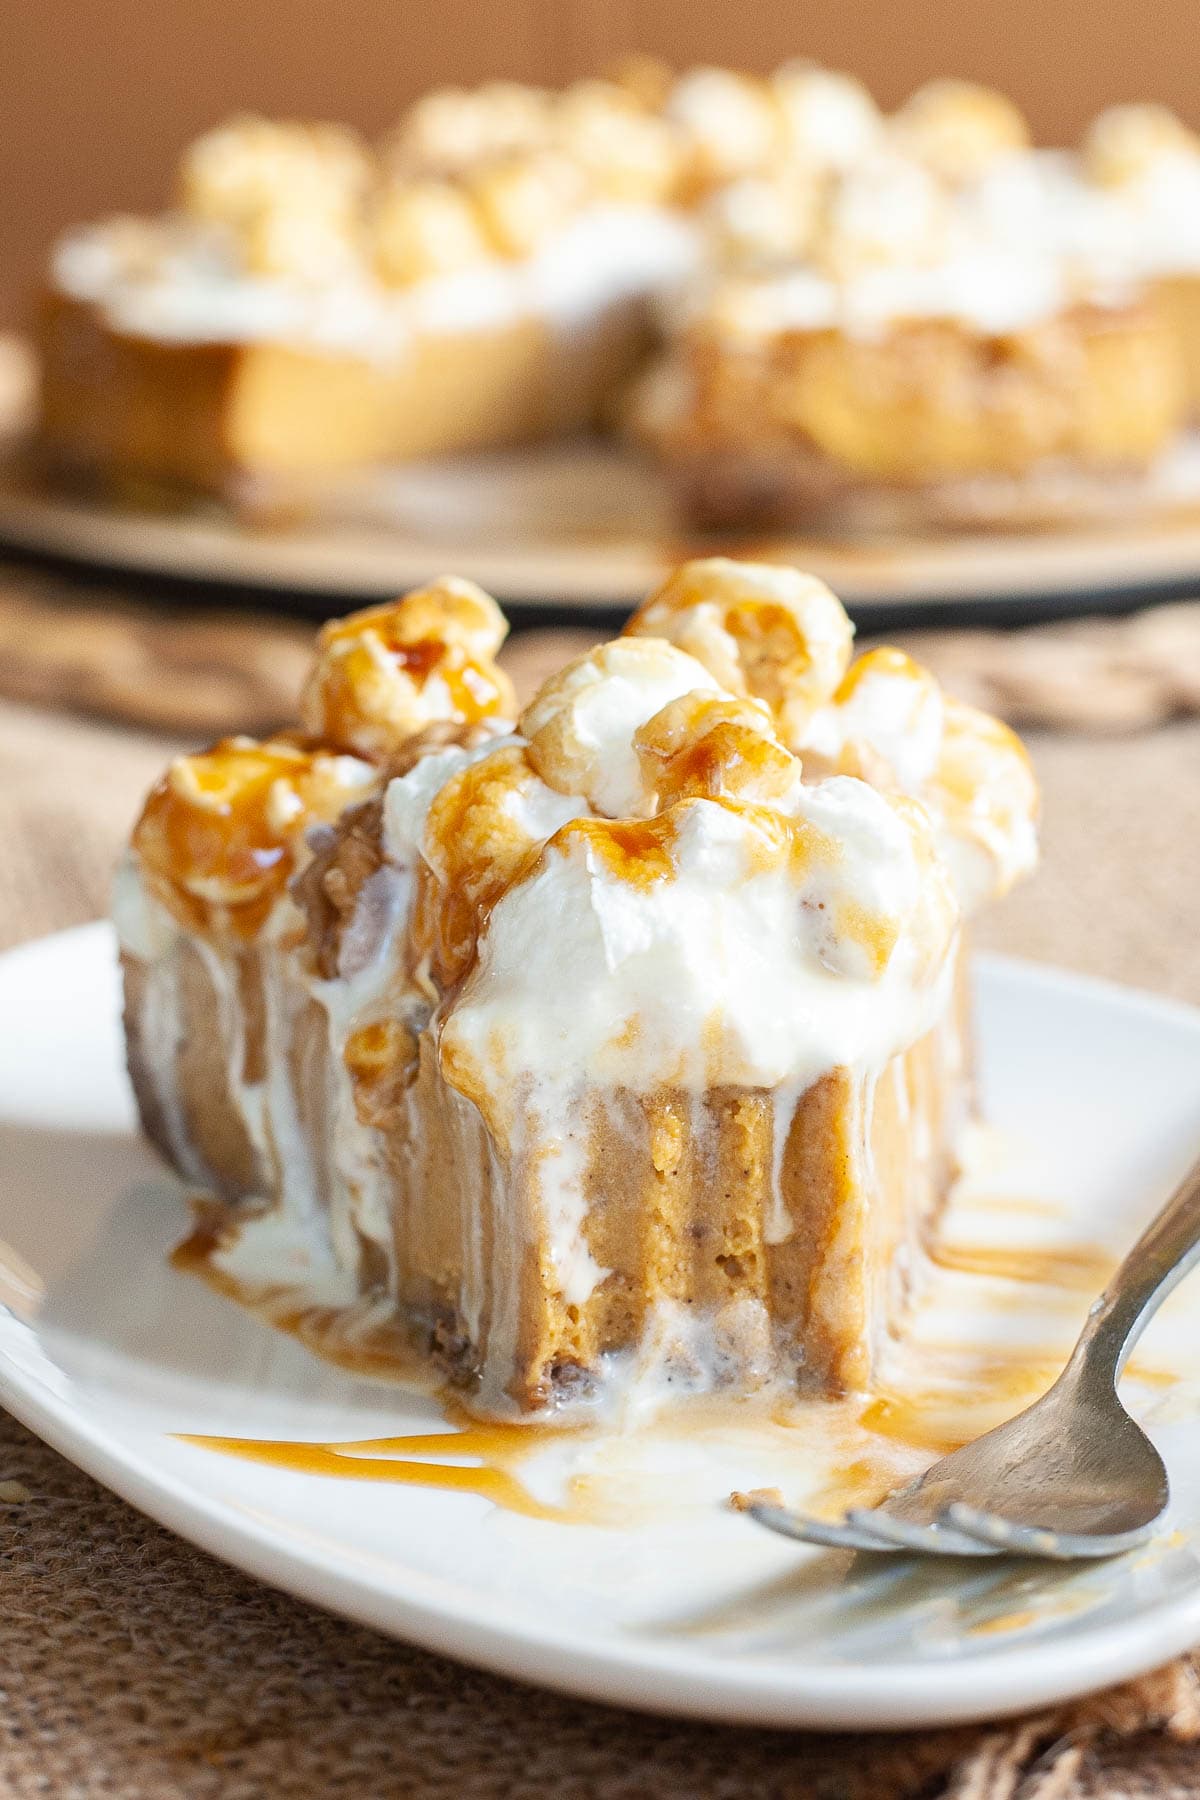 One slice of amber brown cheesecake with whipped cream, caramel sauce and chopped nuts on top is served on a white plate. One bite is missing from the front. The whole cake is in the background.